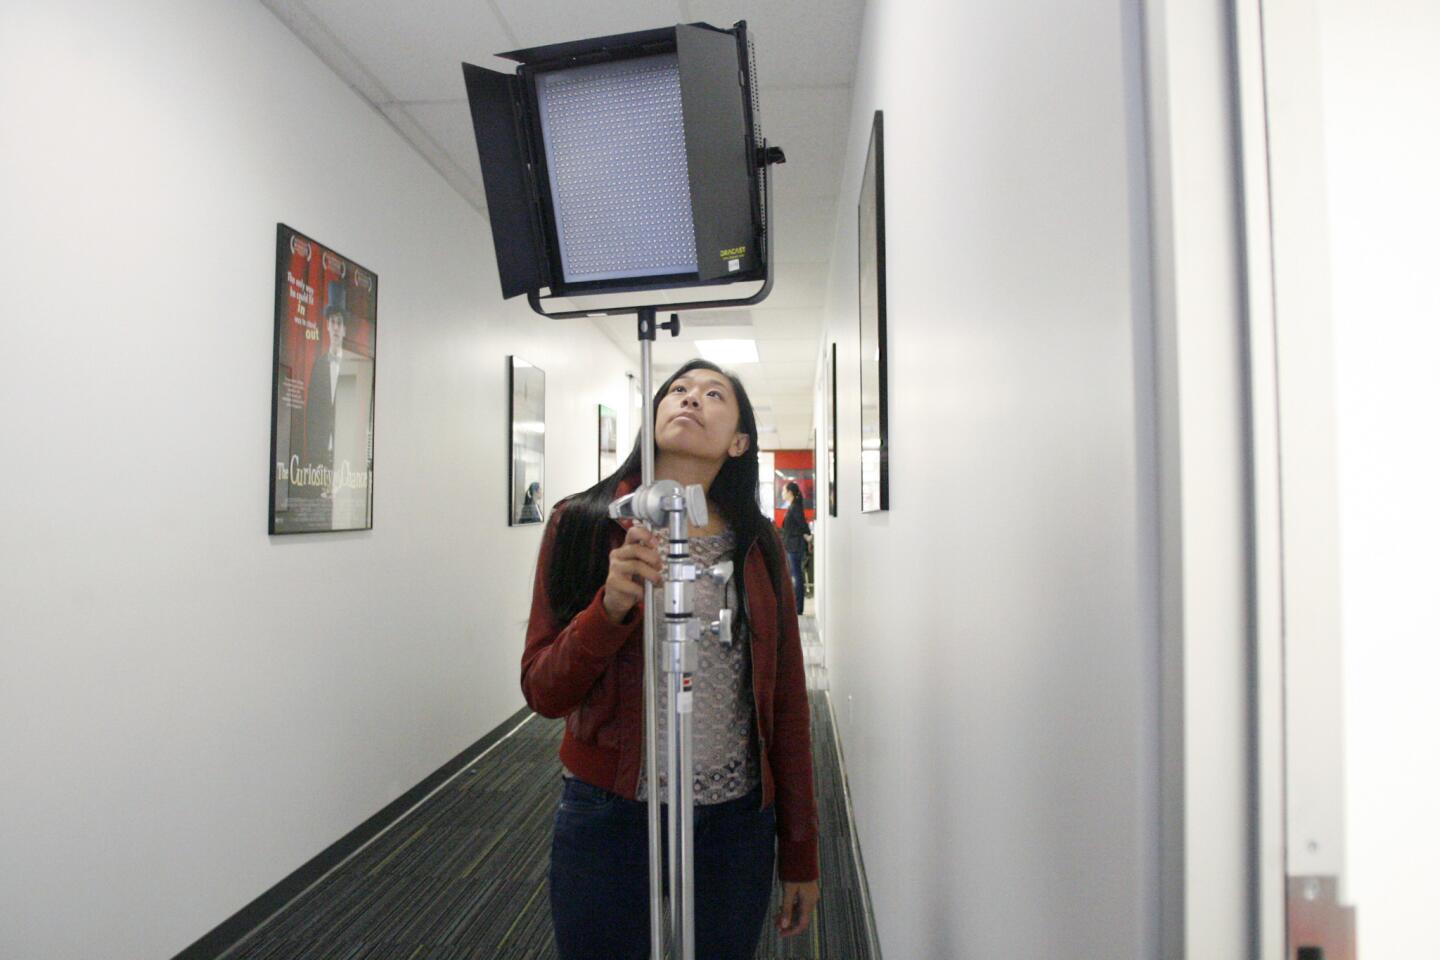 Alyssa Aguilos, 18, takes a look at a light before class at International Academy of Film and Television in Burbank on Wednesday, July 18, 2012.